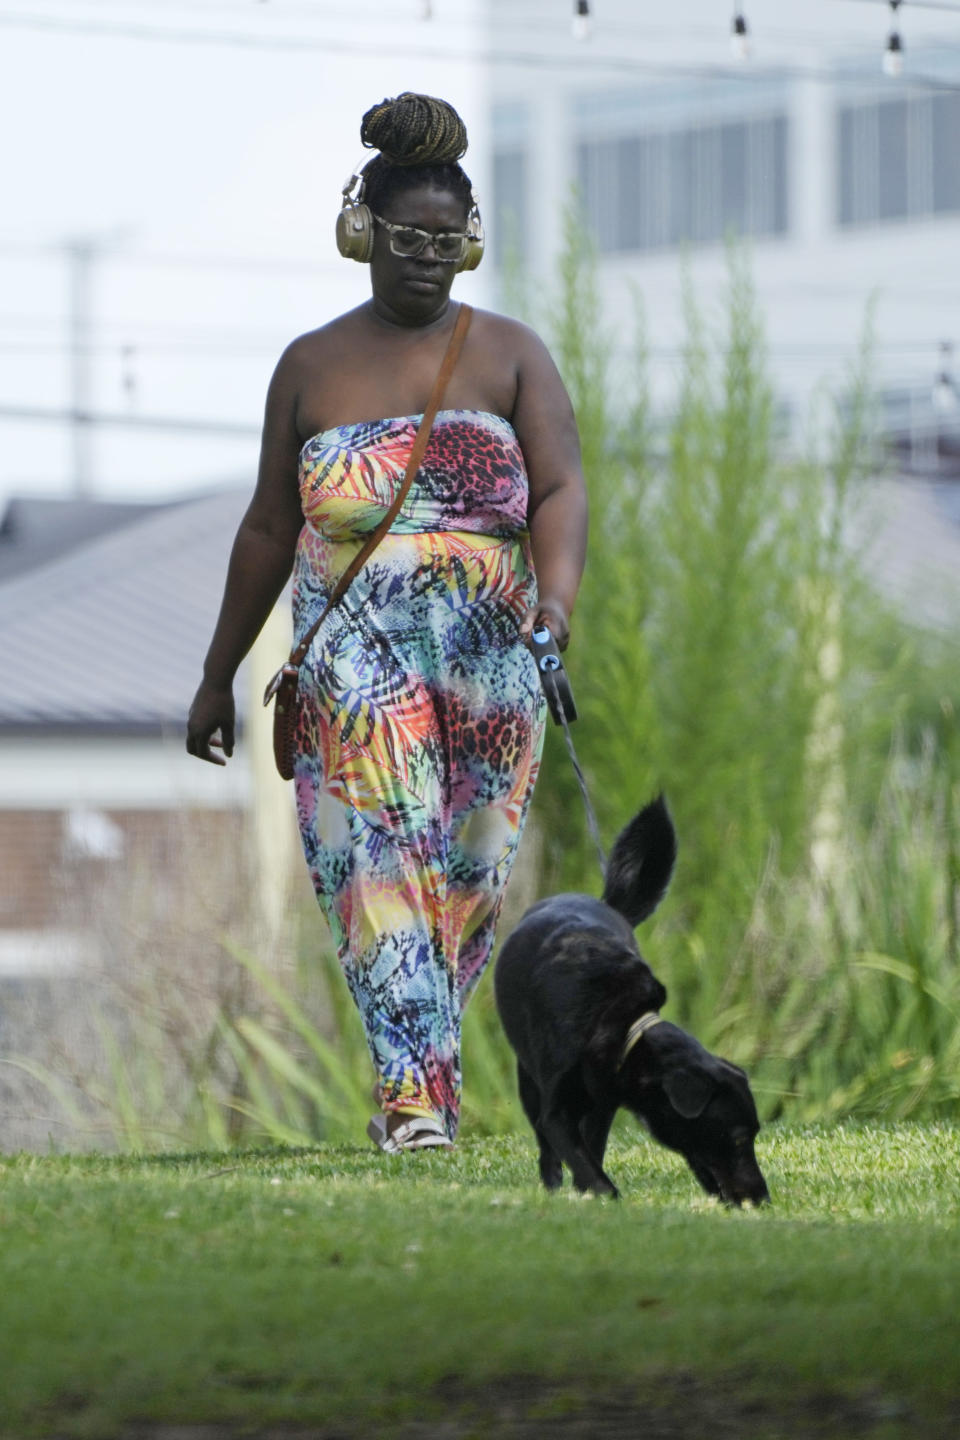 A Jackson, Miss., resident walks her dog through tree provided shade at Smith Park in downtown, Thursday, June 29, 2023. An oppressive heat wave blamed for at least 13 deaths in Texas and one in Louisiana is blanketing the South and the National Weather Service issued an excessive heat warning for parts of the Deep South on Friday, with a heat index expected to reach 115 degrees in several cities. (AP Photo/Rogelio V. Solis)